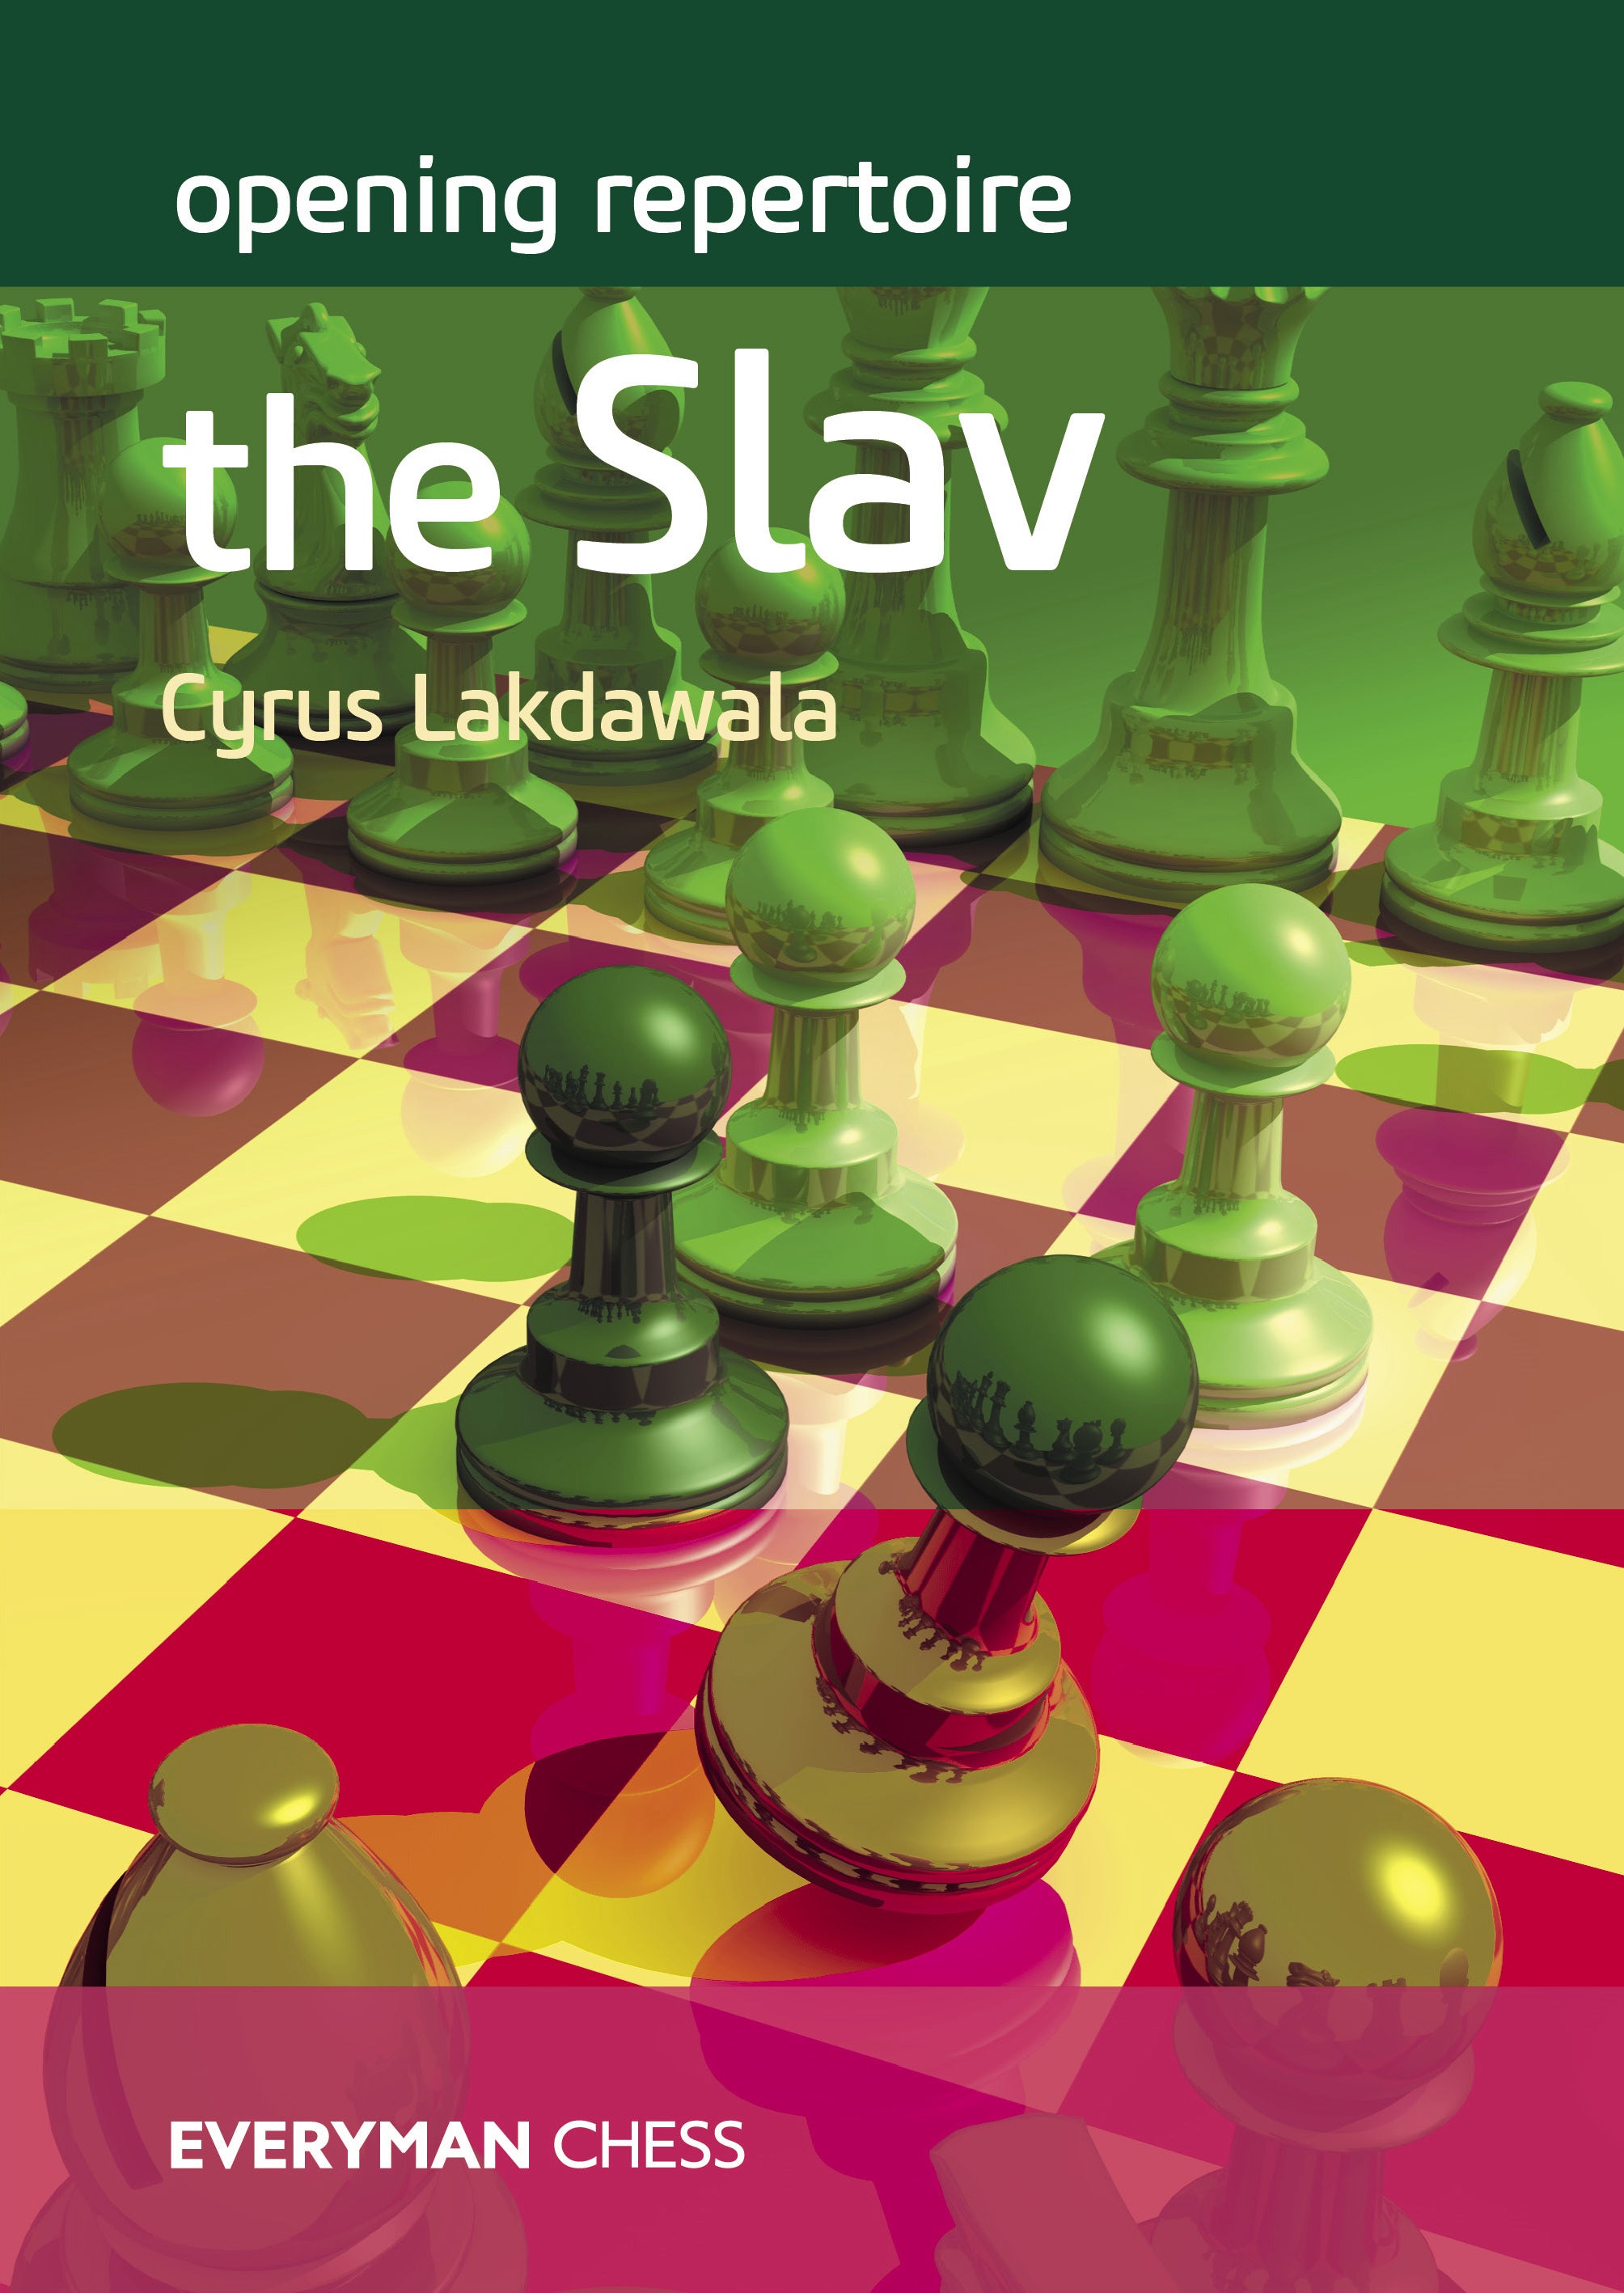 Opening Repertoire: The Caro-Kann Defense - Chess Opening E-book Download